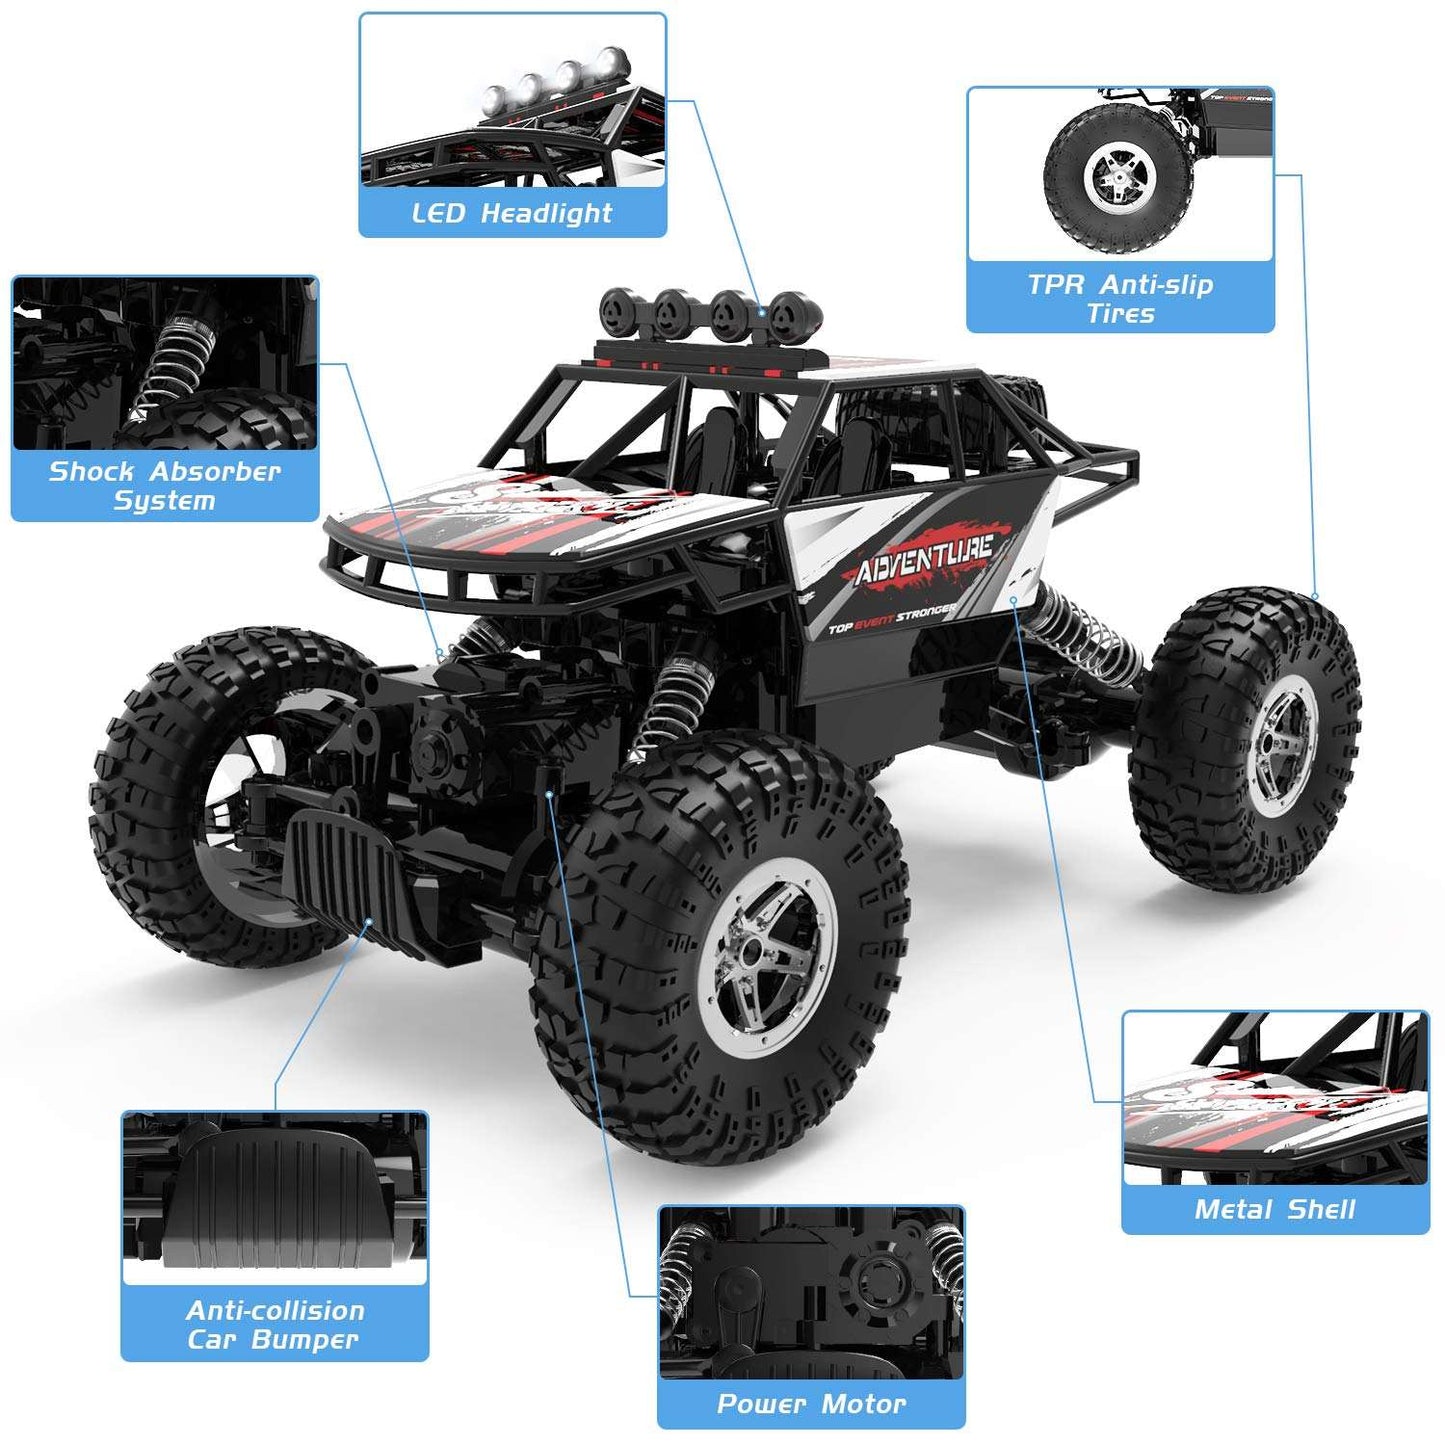 DEERC DE45 RC Cars Remote Control Car Off Road Monster Truck,1:16 Metal Shell 4WD Dual Motors LED Headlight Rock Crawler,2.4Ghz All Terrain Hobby Truck with 2 Batteries for 90 Min Play,Boy Adult Gifts - Hatke